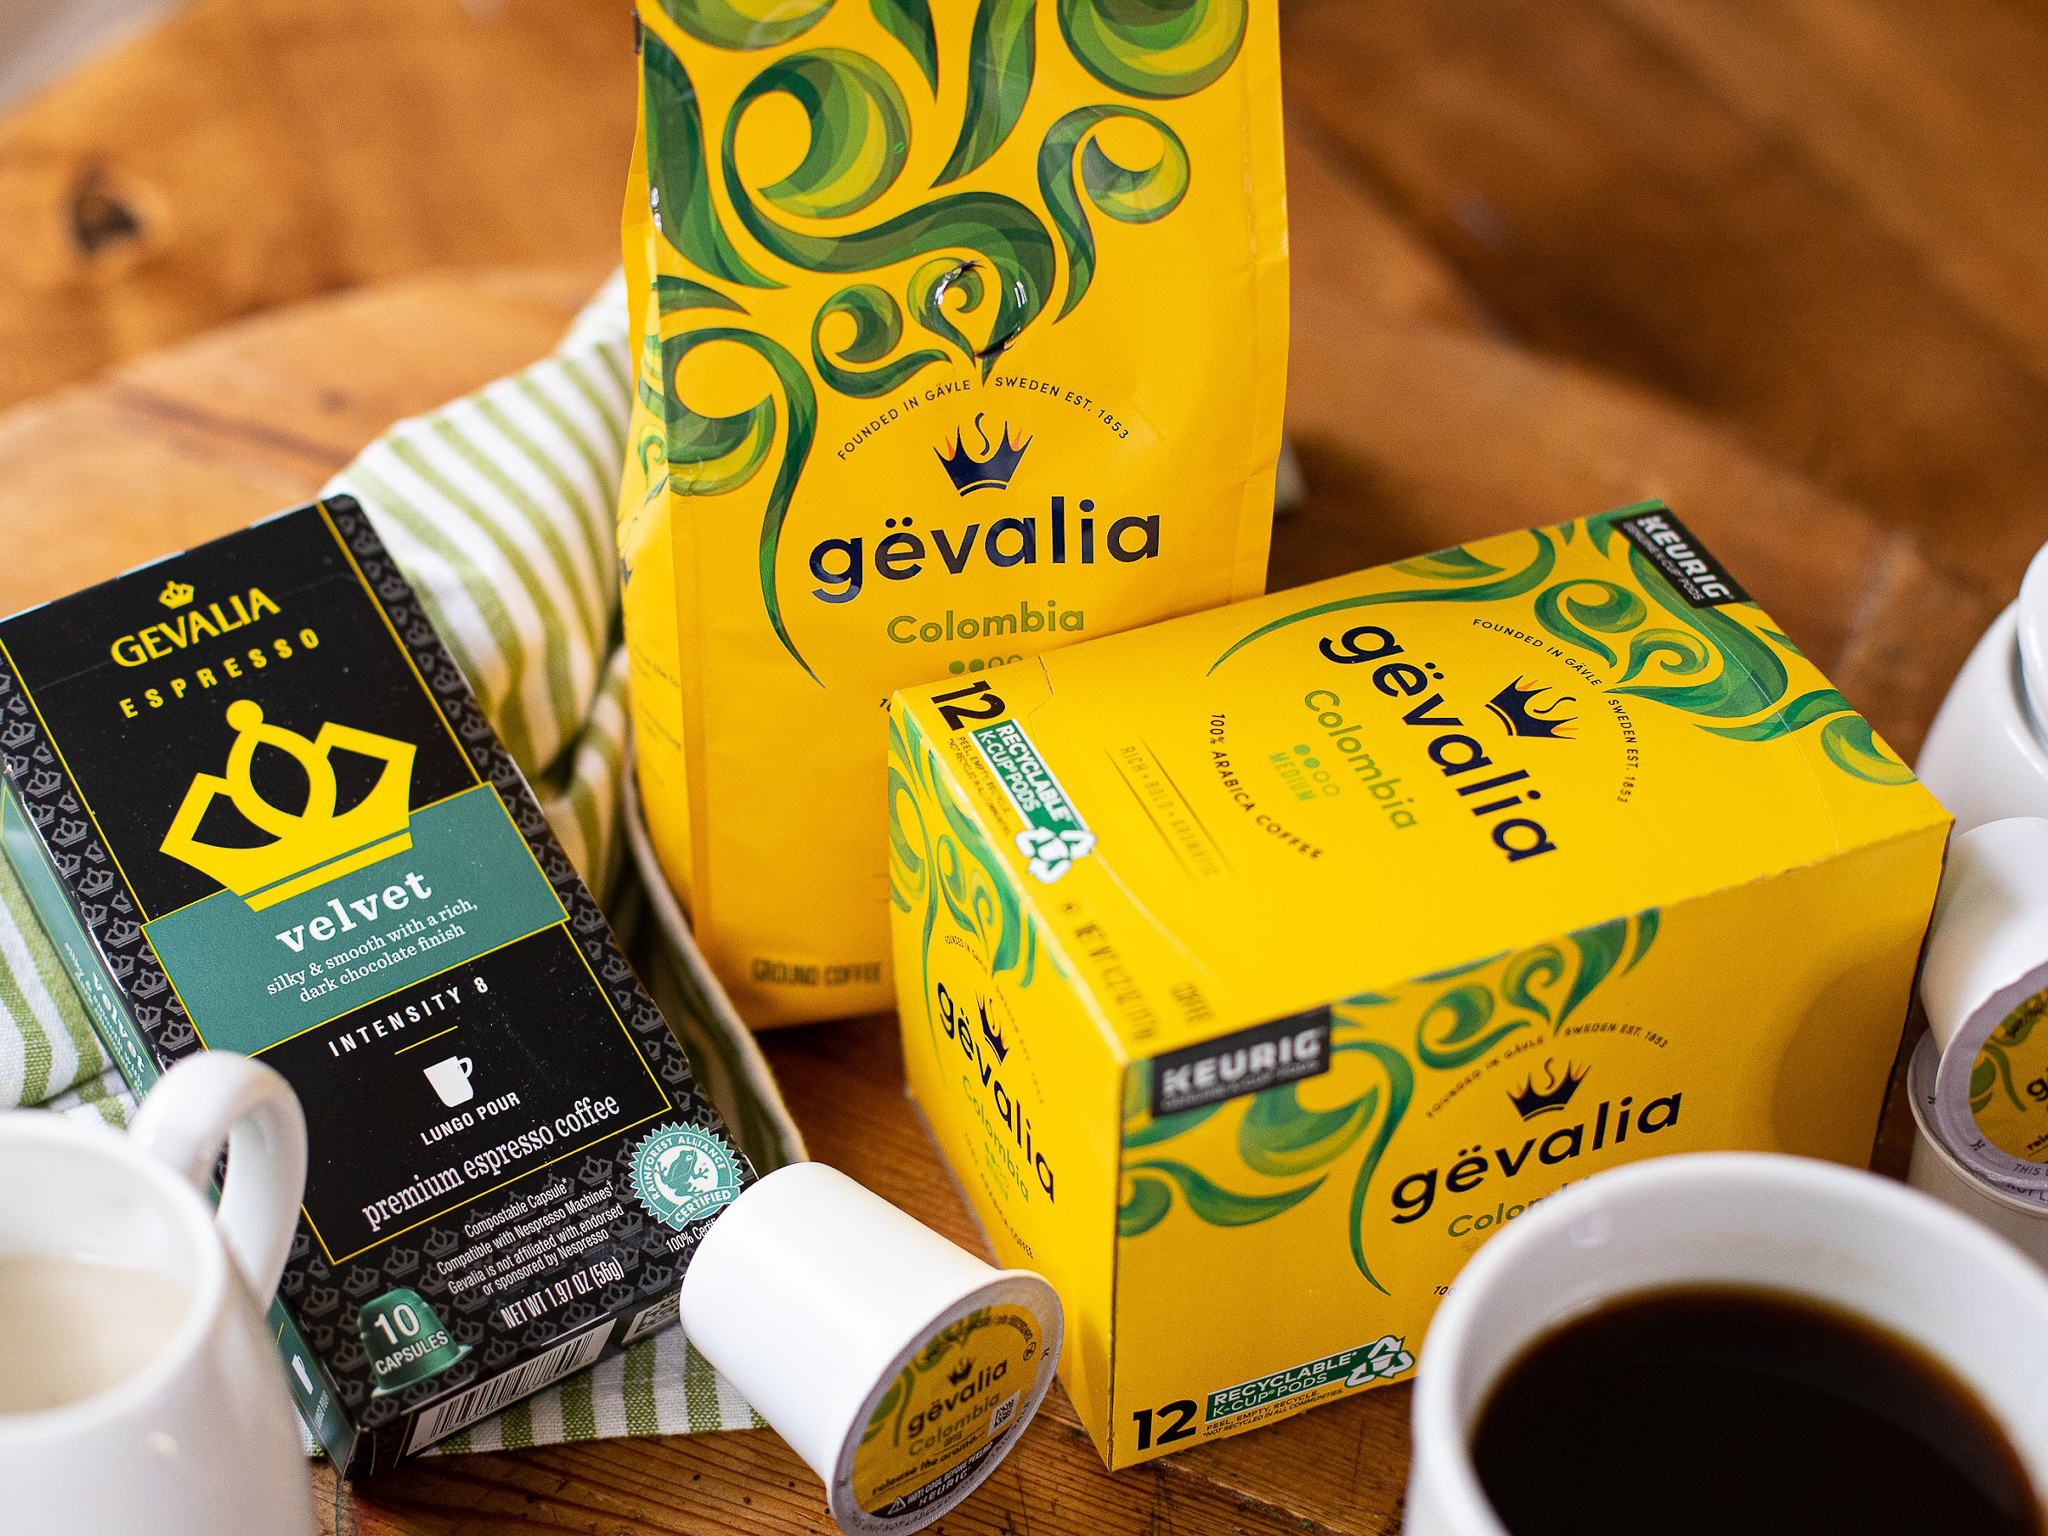 Time To Stock Up On The Coffee You Love - Great Tasting Gevalia Coffees Are BOGO At Publix on I Heart Publix